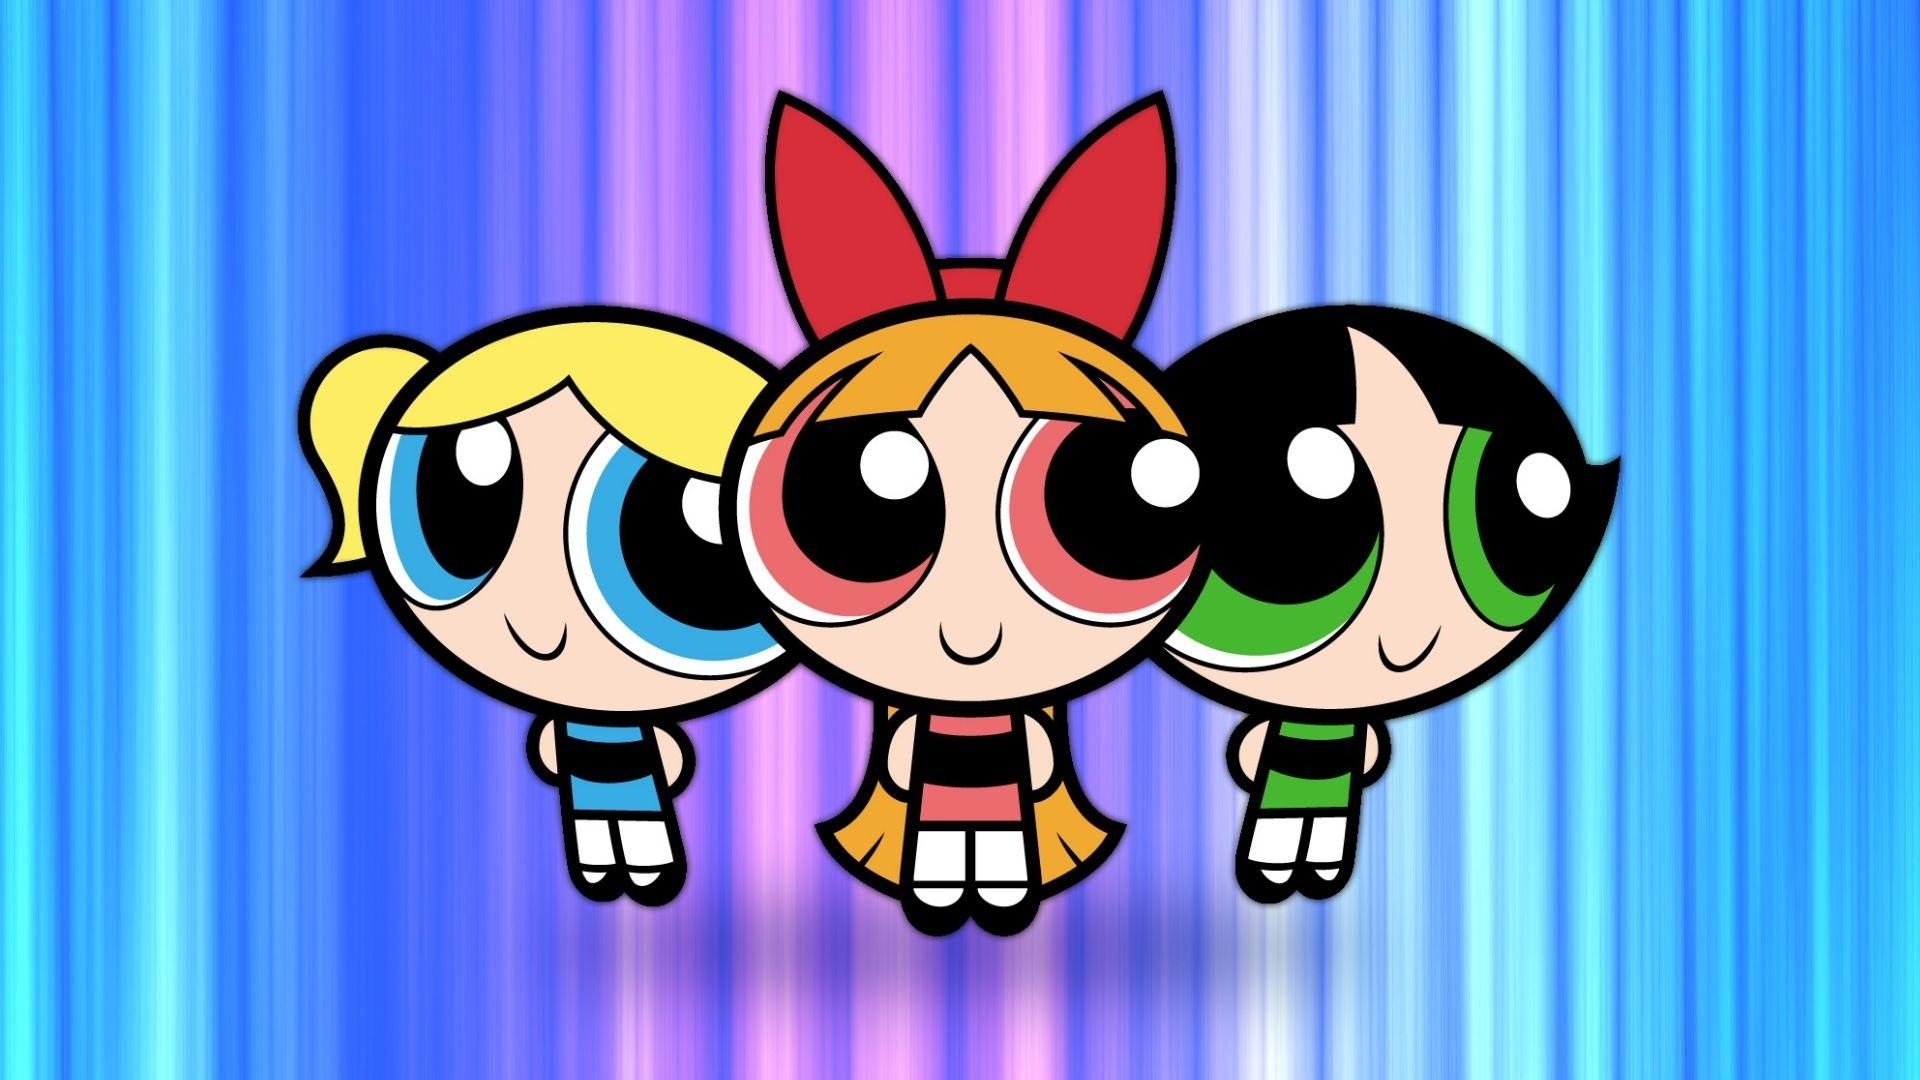 10 New Powder Puff Girls Wallpaper FULL HD 1920×1080 For PC Background